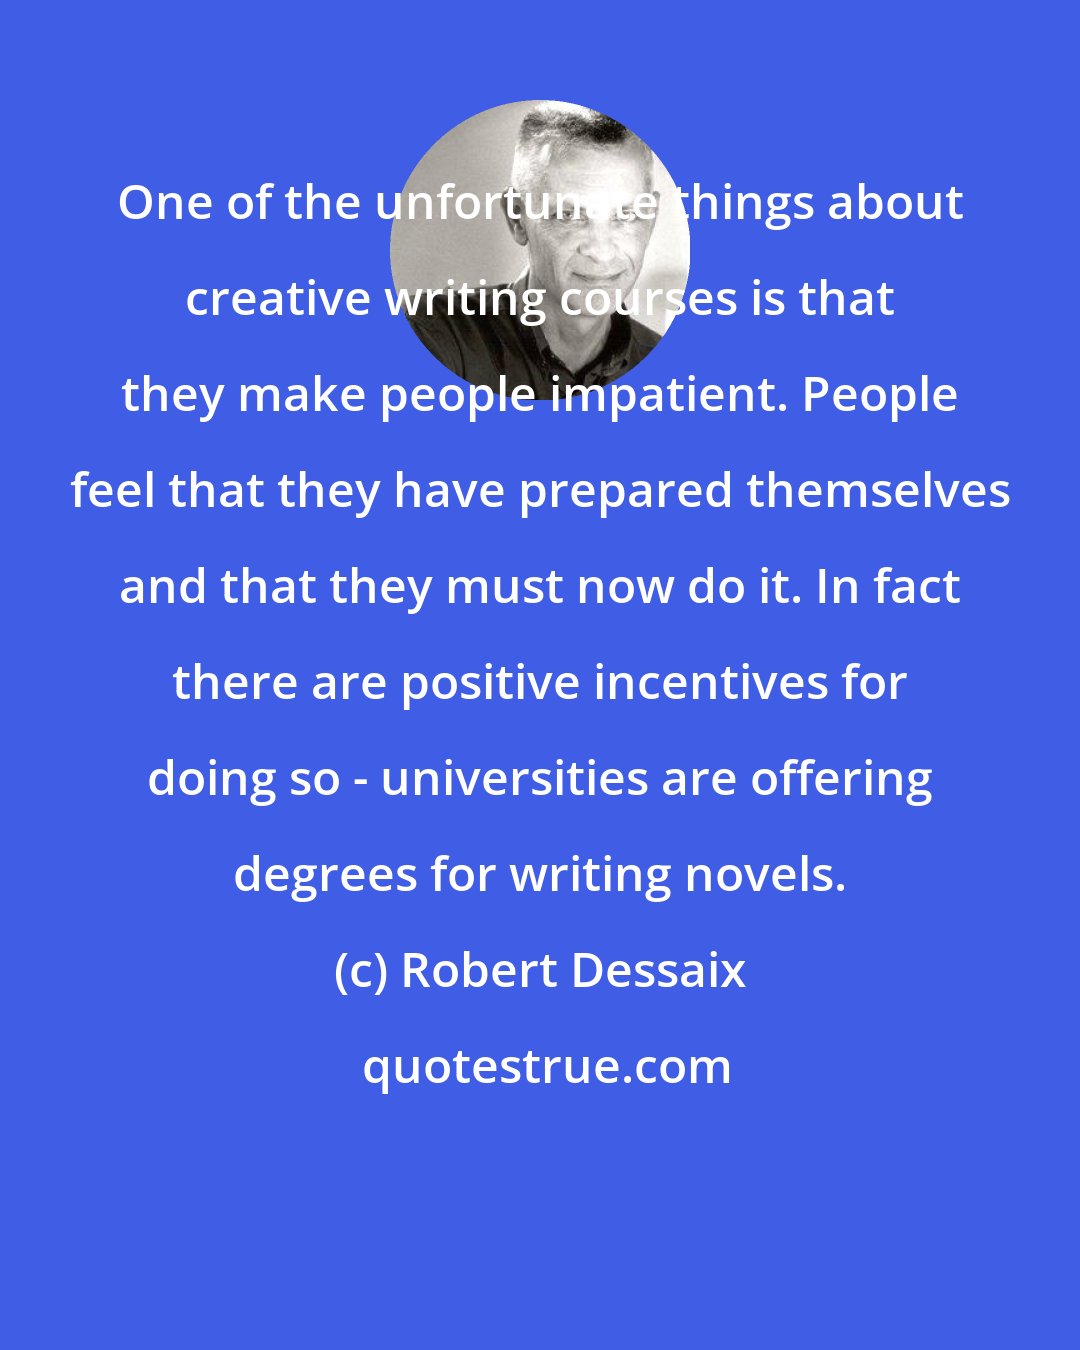 Robert Dessaix: One of the unfortunate things about creative writing courses is that they make people impatient. People feel that they have prepared themselves and that they must now do it. In fact there are positive incentives for doing so - universities are offering degrees for writing novels.